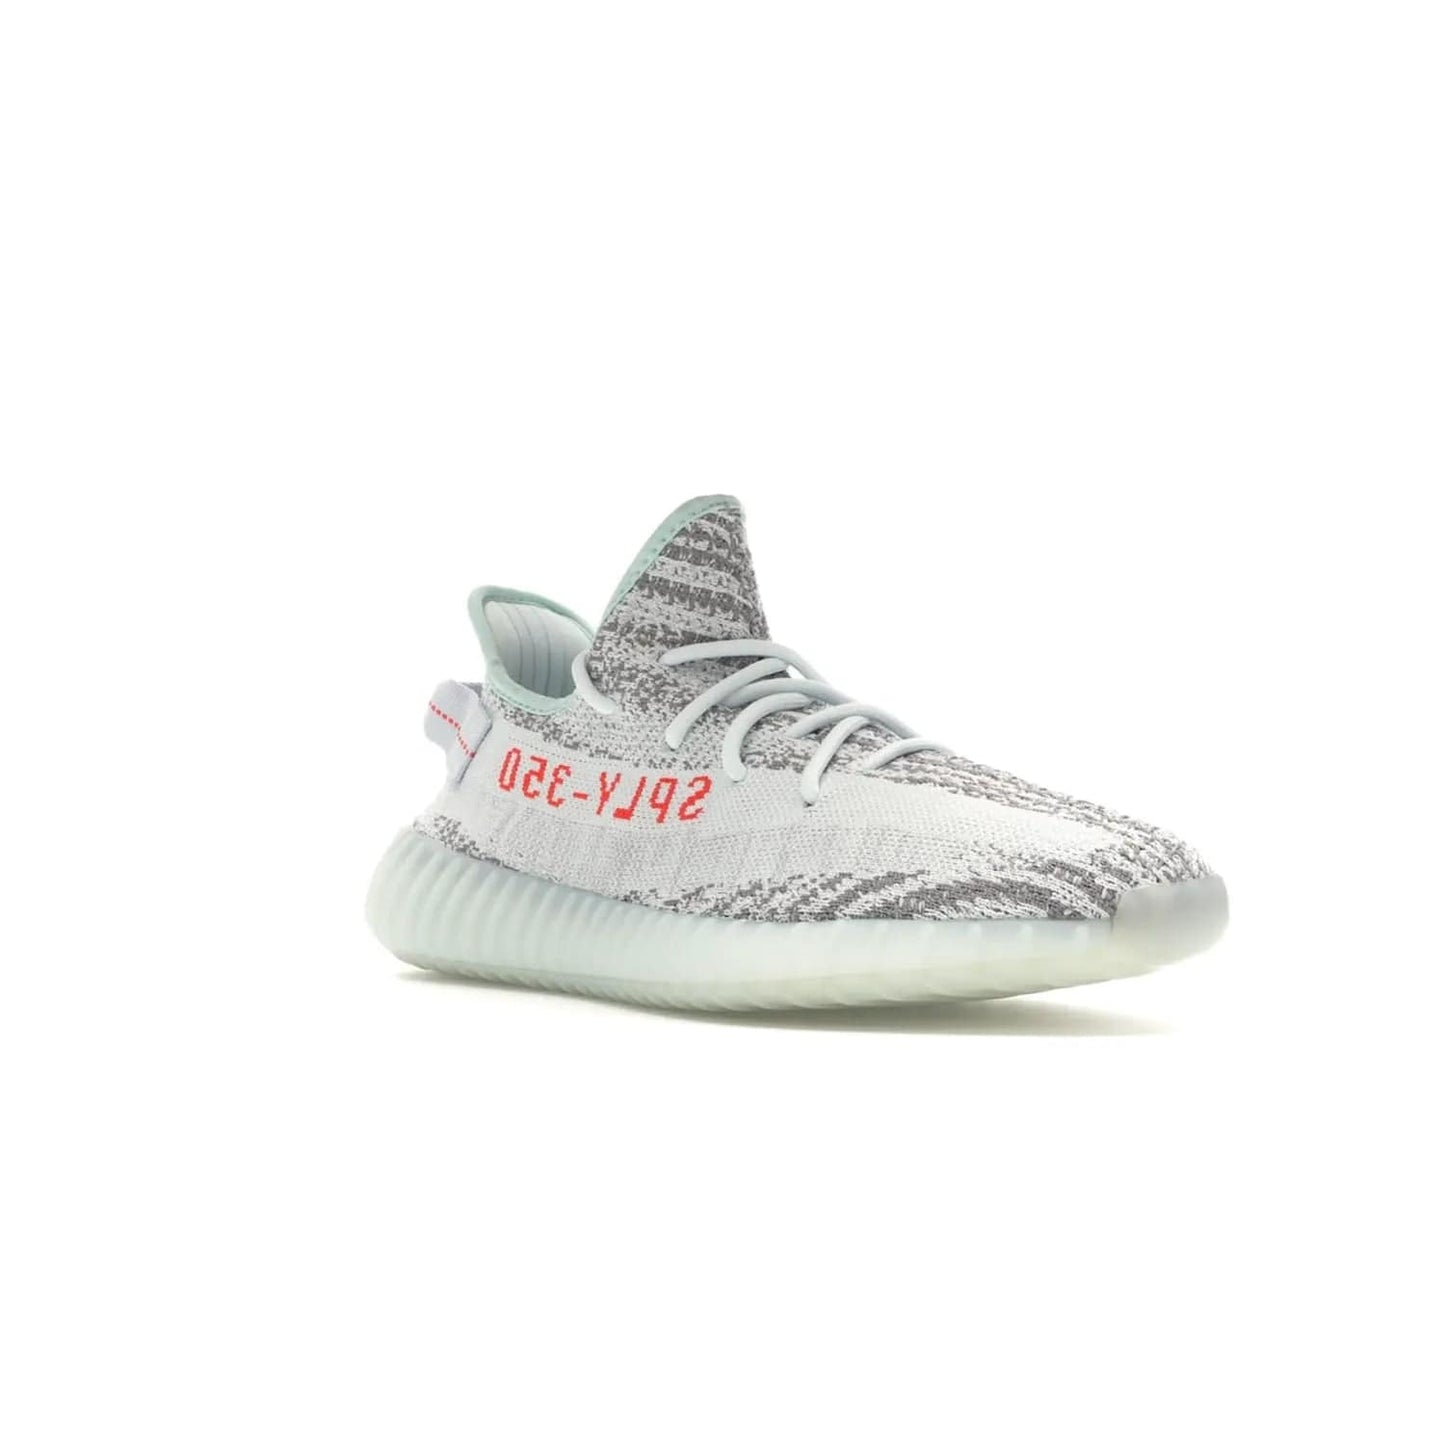 adidas Yeezy Boost 350 V2 Blue Tint - Image 6 - Only at www.BallersClubKickz.com - The adidas Yeezy Boost 350 V2 Blue Tint merges fashion and functionality with its Primeknit upper and Boost sole. Released in December 2017, this luxurious sneaker is perfect for making a stylish statement.